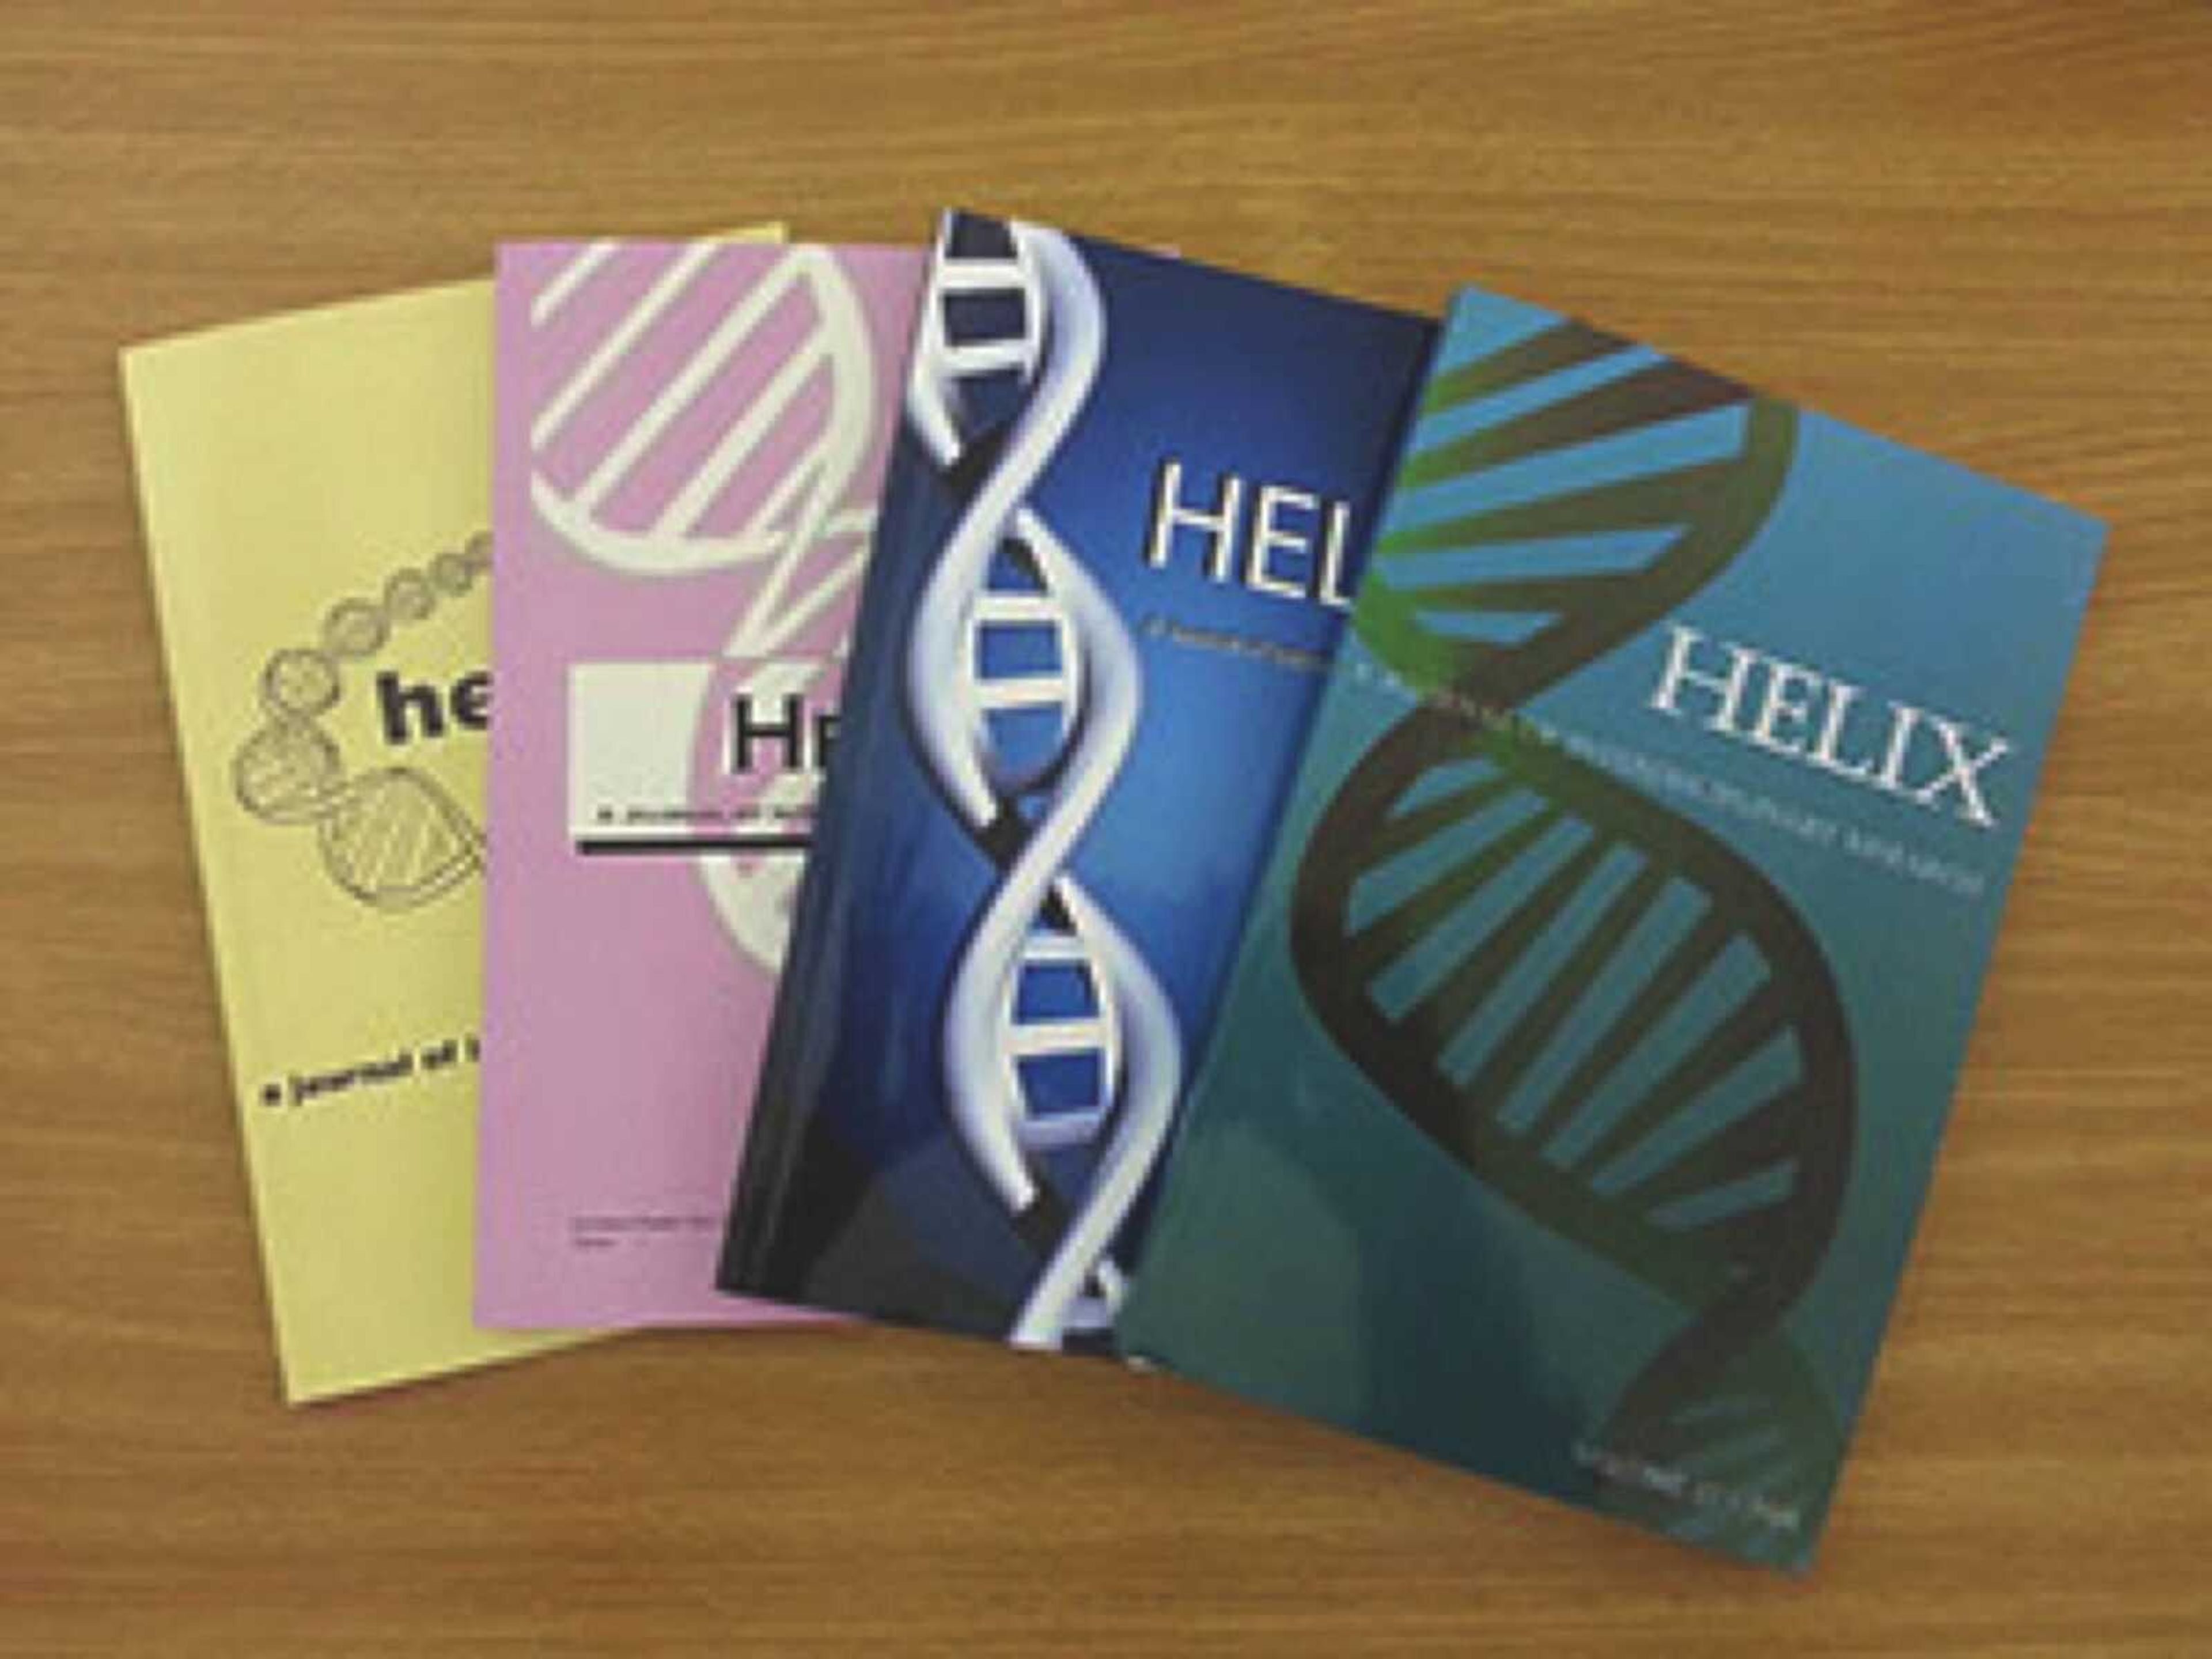 Helix has published student research since 2001 at Southeast.